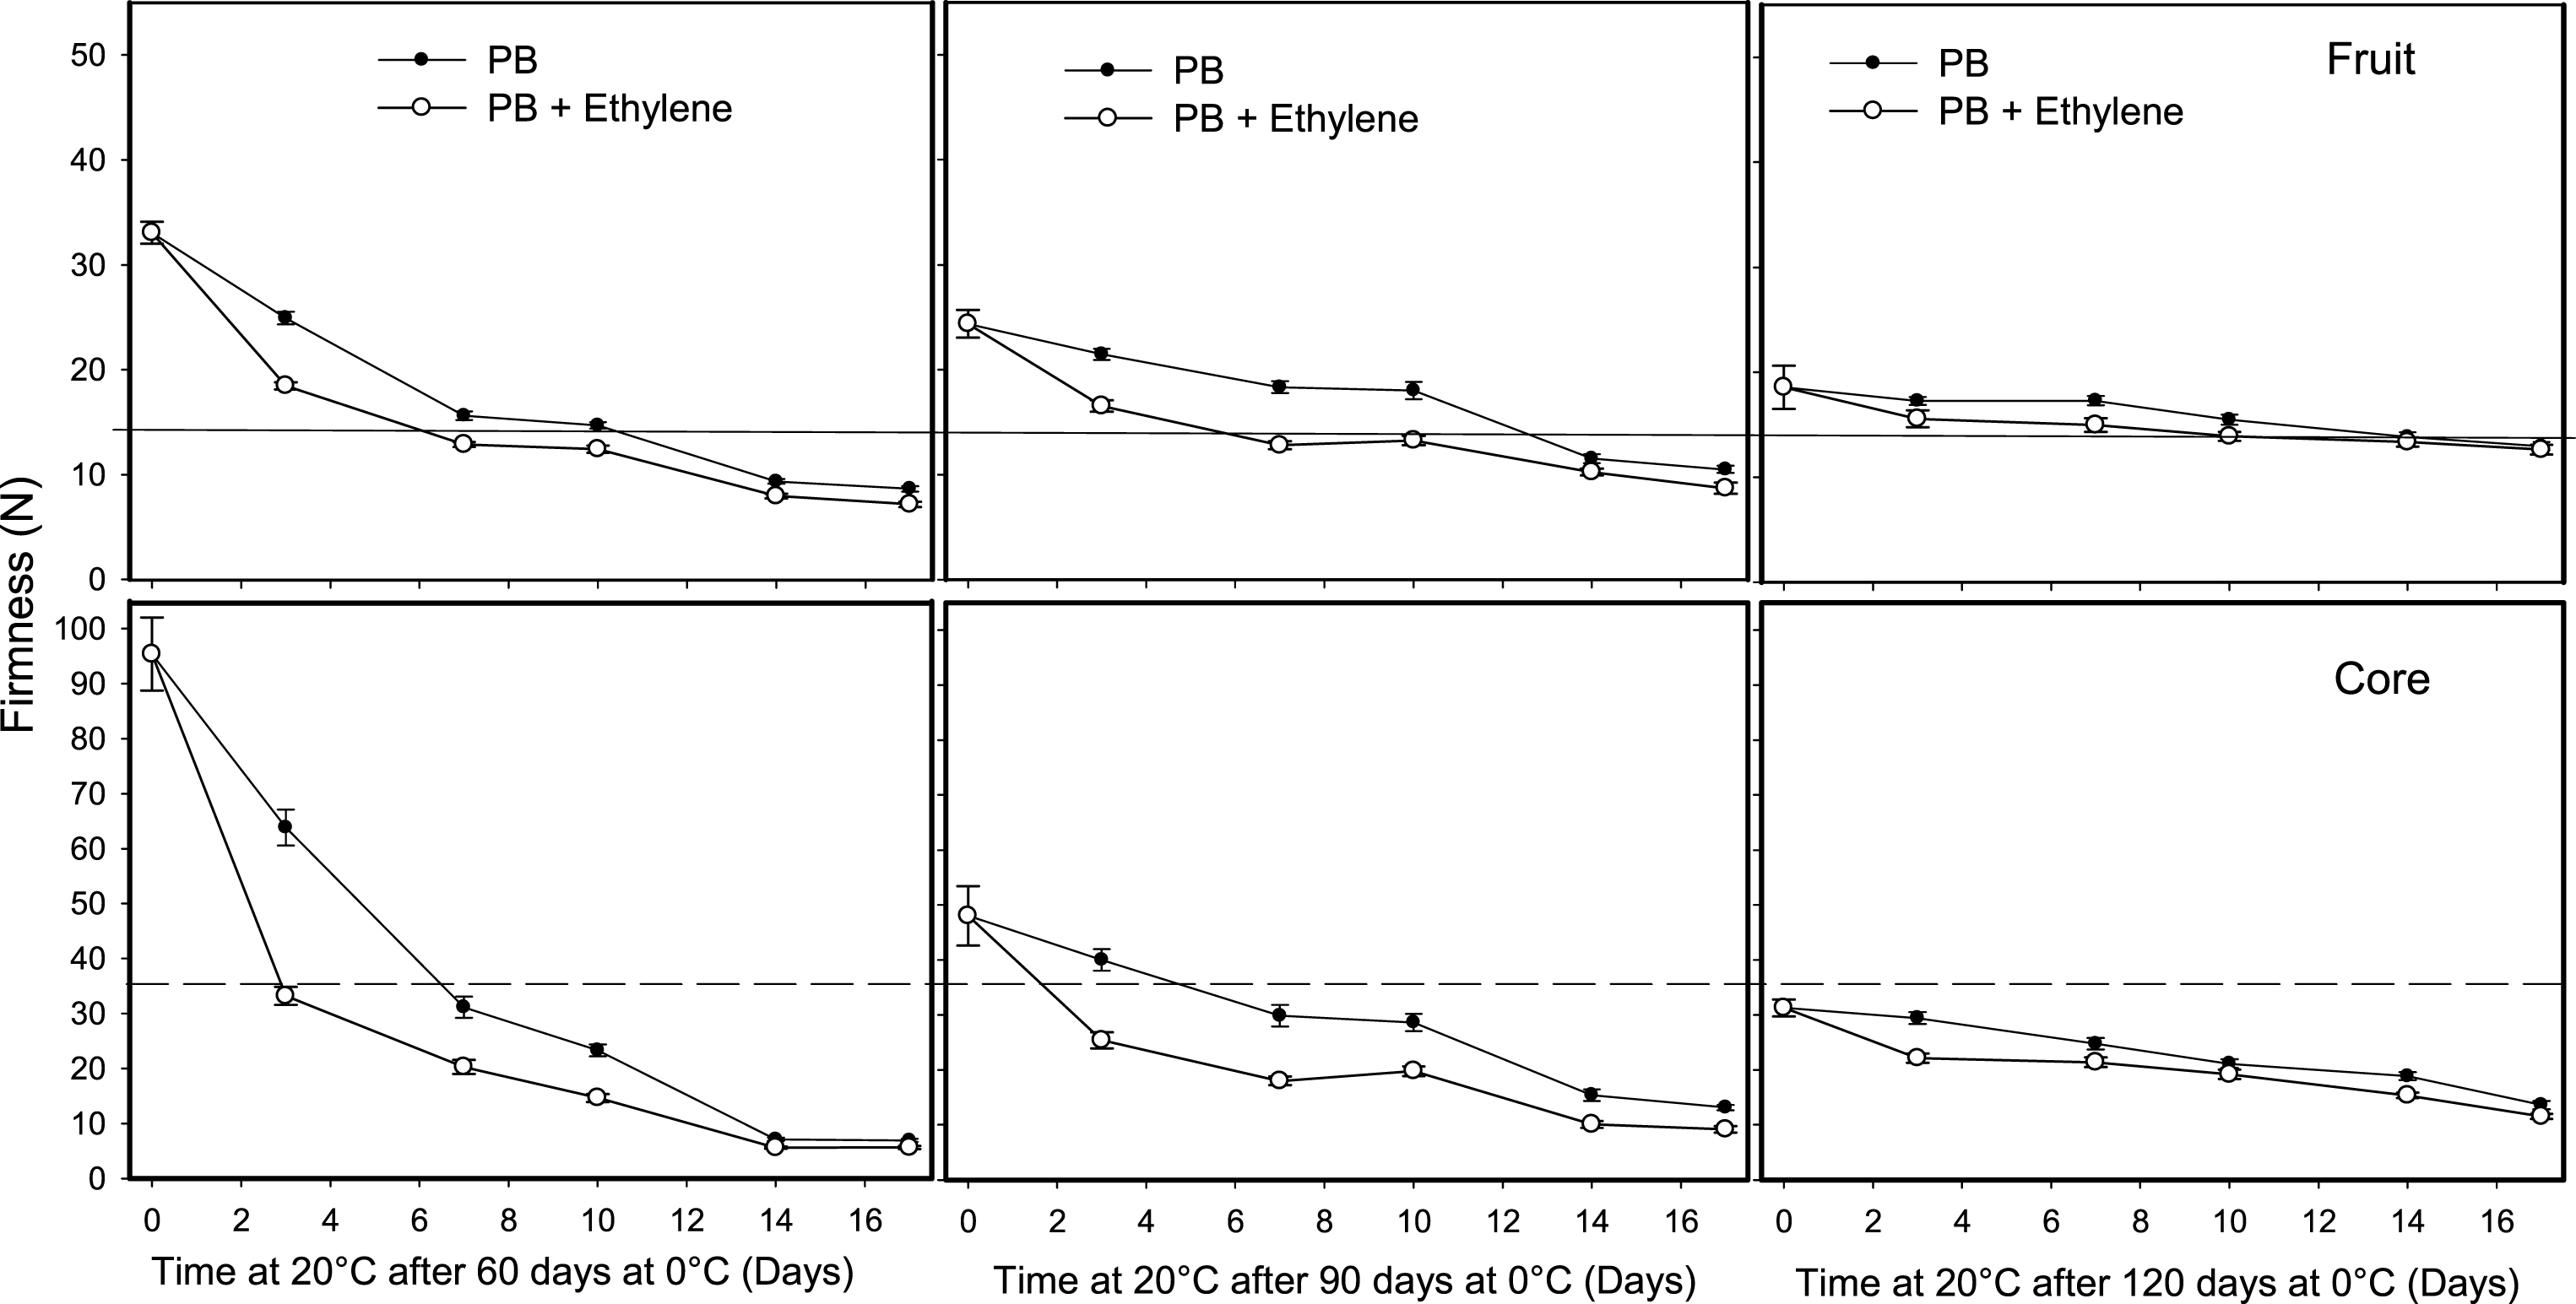 Effect of ethylene on softening of whole kiwifruit or core tissue during ripening at 20°C after storage for 60, 90 or 120 days at 0°C. Ethylene (100 μl l–1) was applied at 20°C for 12 h after removing fruit packed in a perforated bag (PB). The solid and dotted horizontal lines indicate the ready to eat firmness value (<13 N) and soft core firmness perception (<35.5 N) receptively. The vertical bar represents the standard error of the firmness mean of 4 replicates of 15 fruit each.